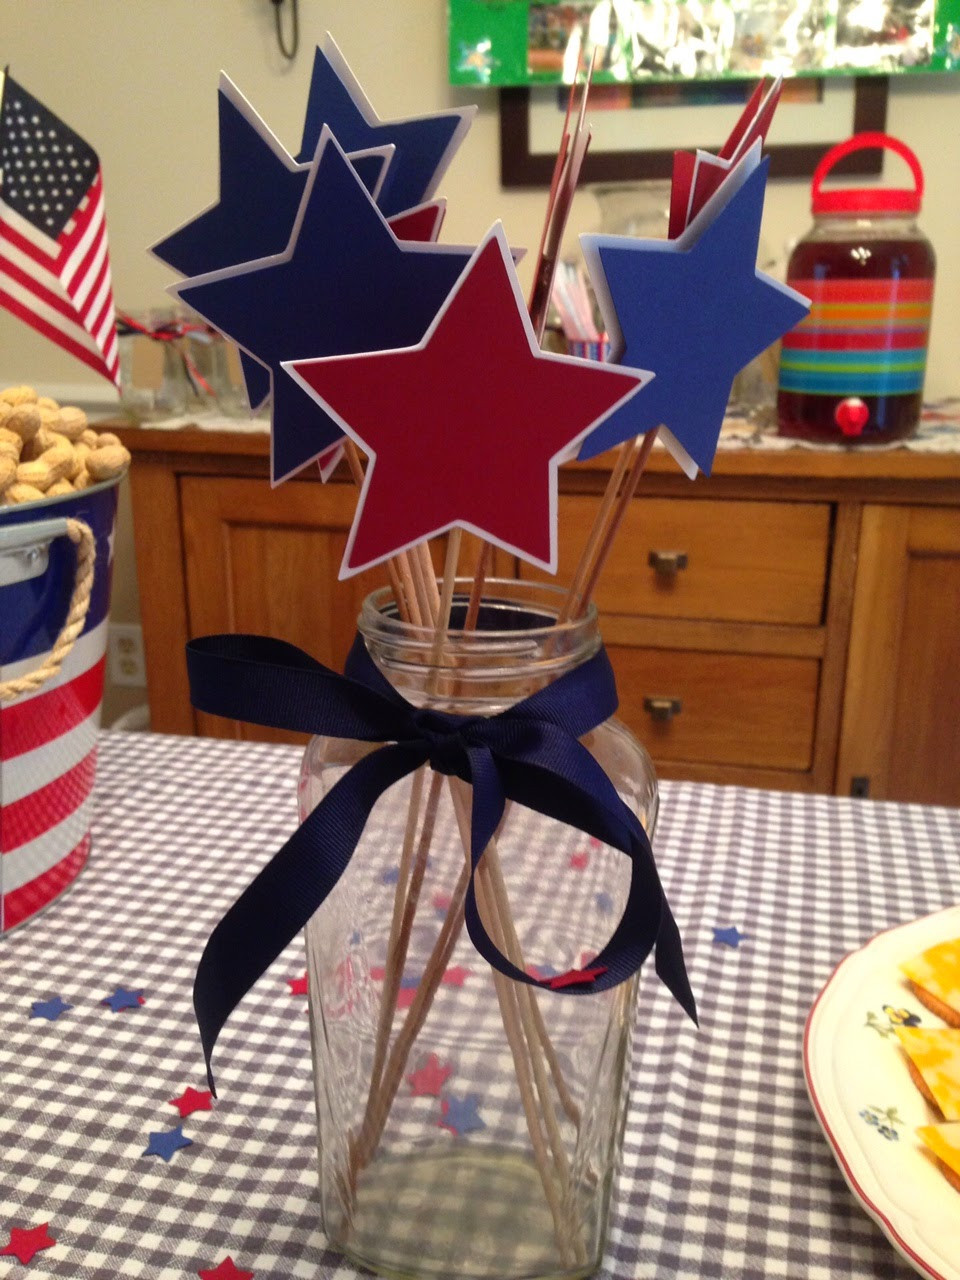 December College Graduation Party Ideas
 New Every Morning Patriotic Graduation Party Decorations